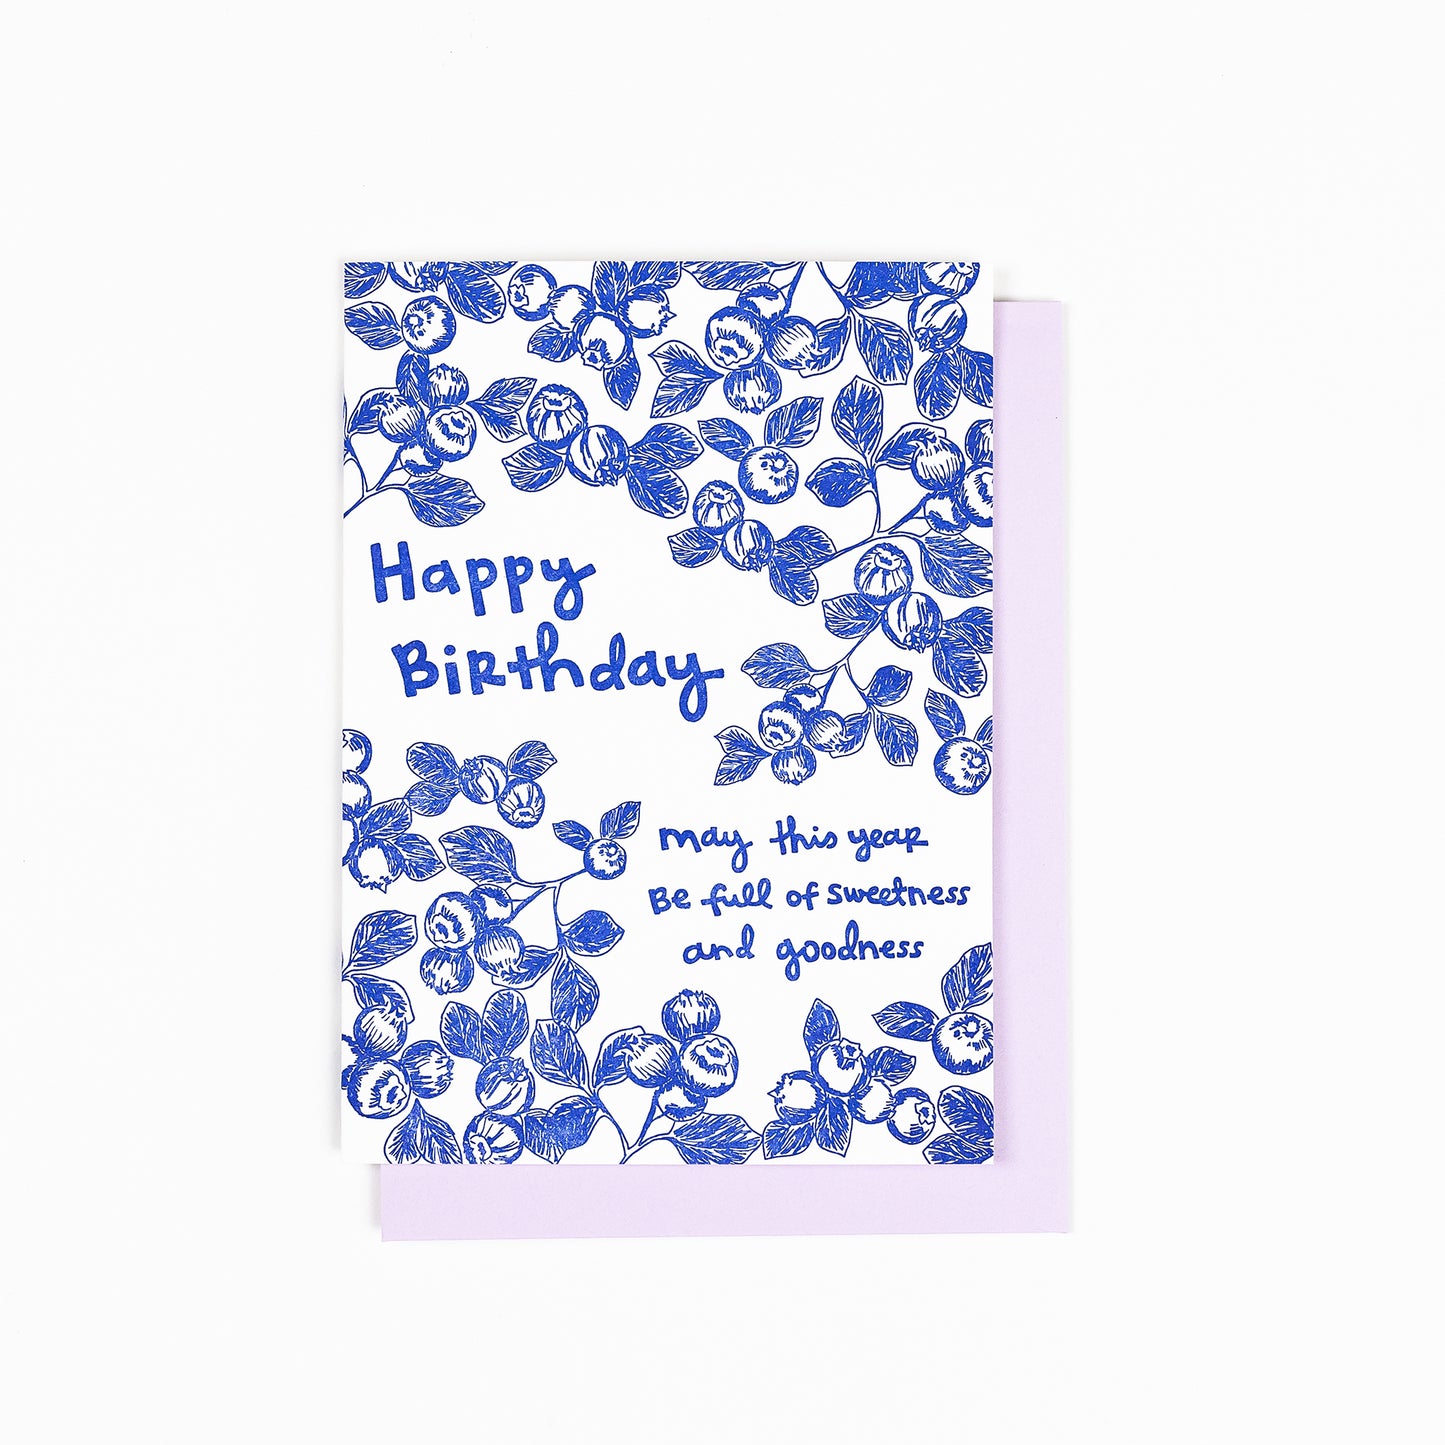 Letterpress greeting card featuring hand-drawn blueberries printed in an vibrant blue ink. "Happy Birthday! May this year be full of sweetness and goodness" is written on the card in a whimsical hand-drawn text, in the same blue ink. The card is white, blank inside, and is paired with a soft lilac envelope.